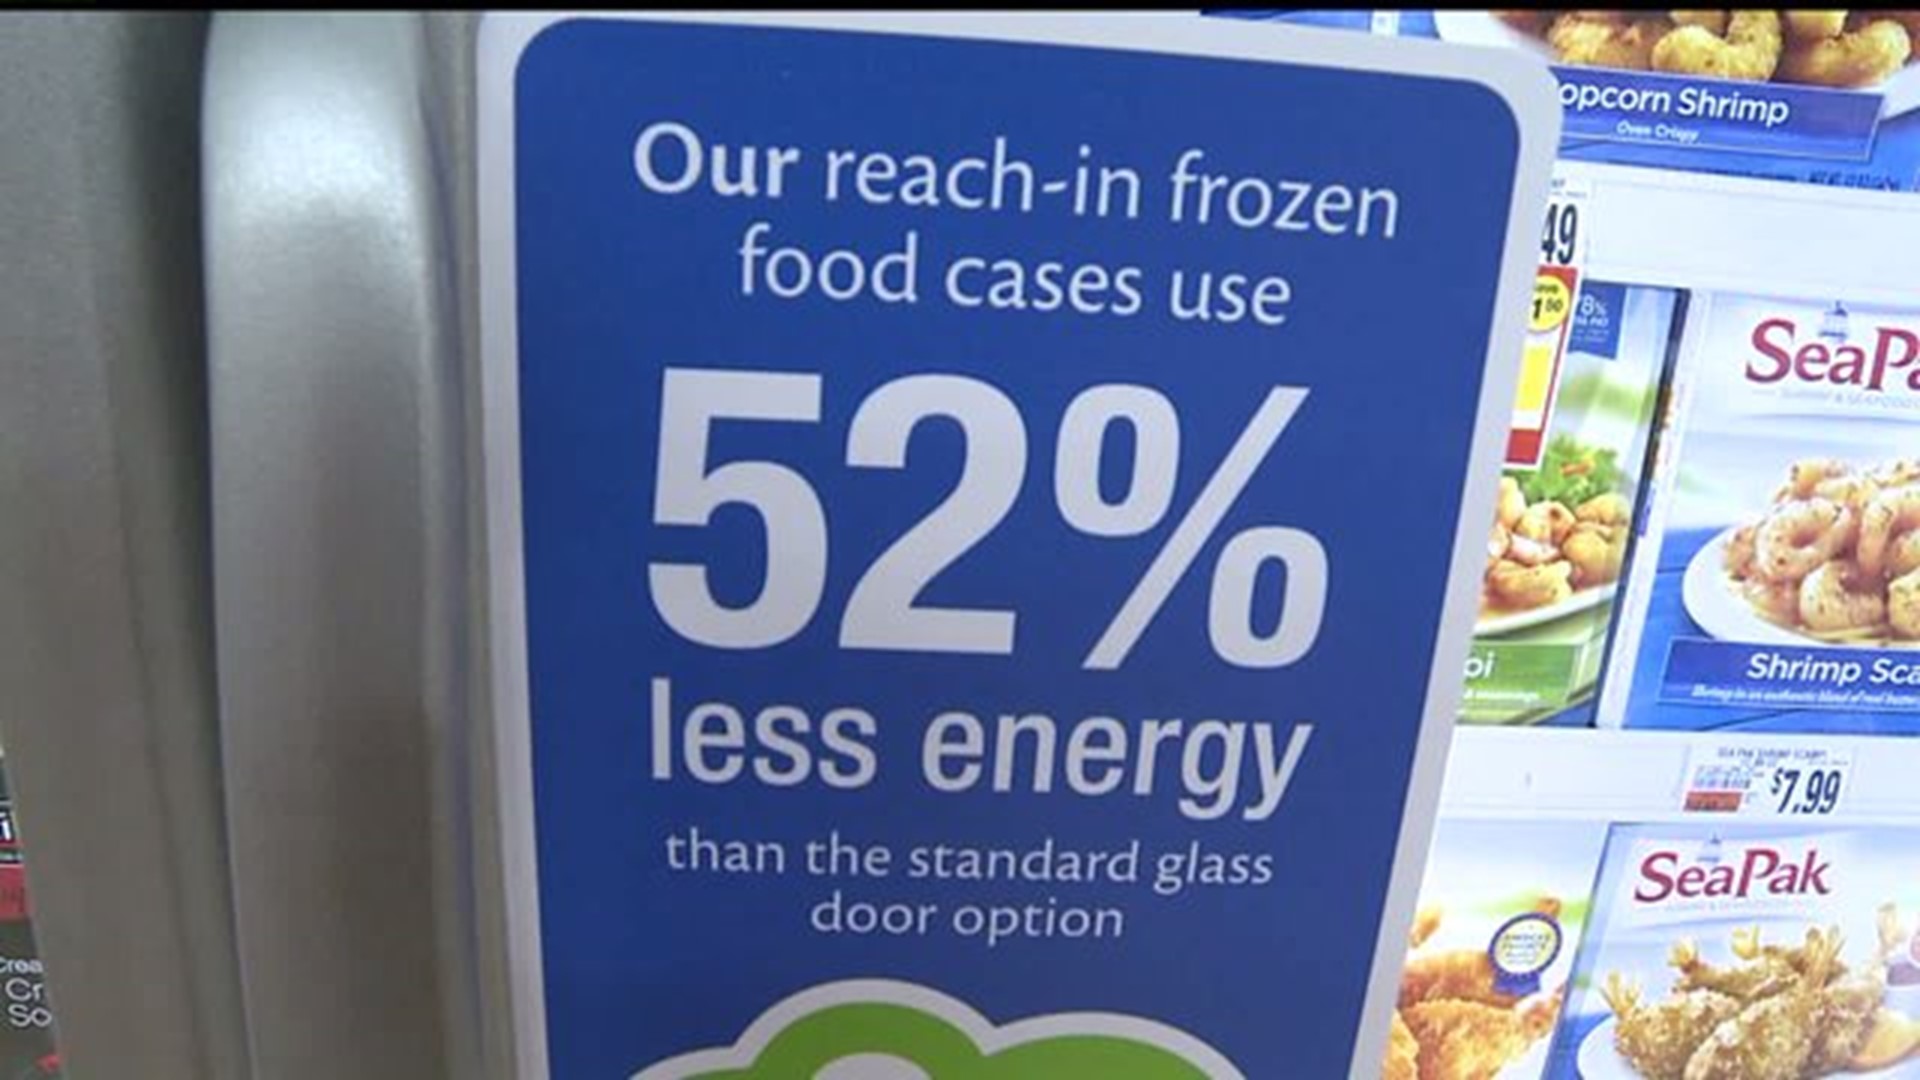 A local grocery store makes a "giant" gain with energy efficiency